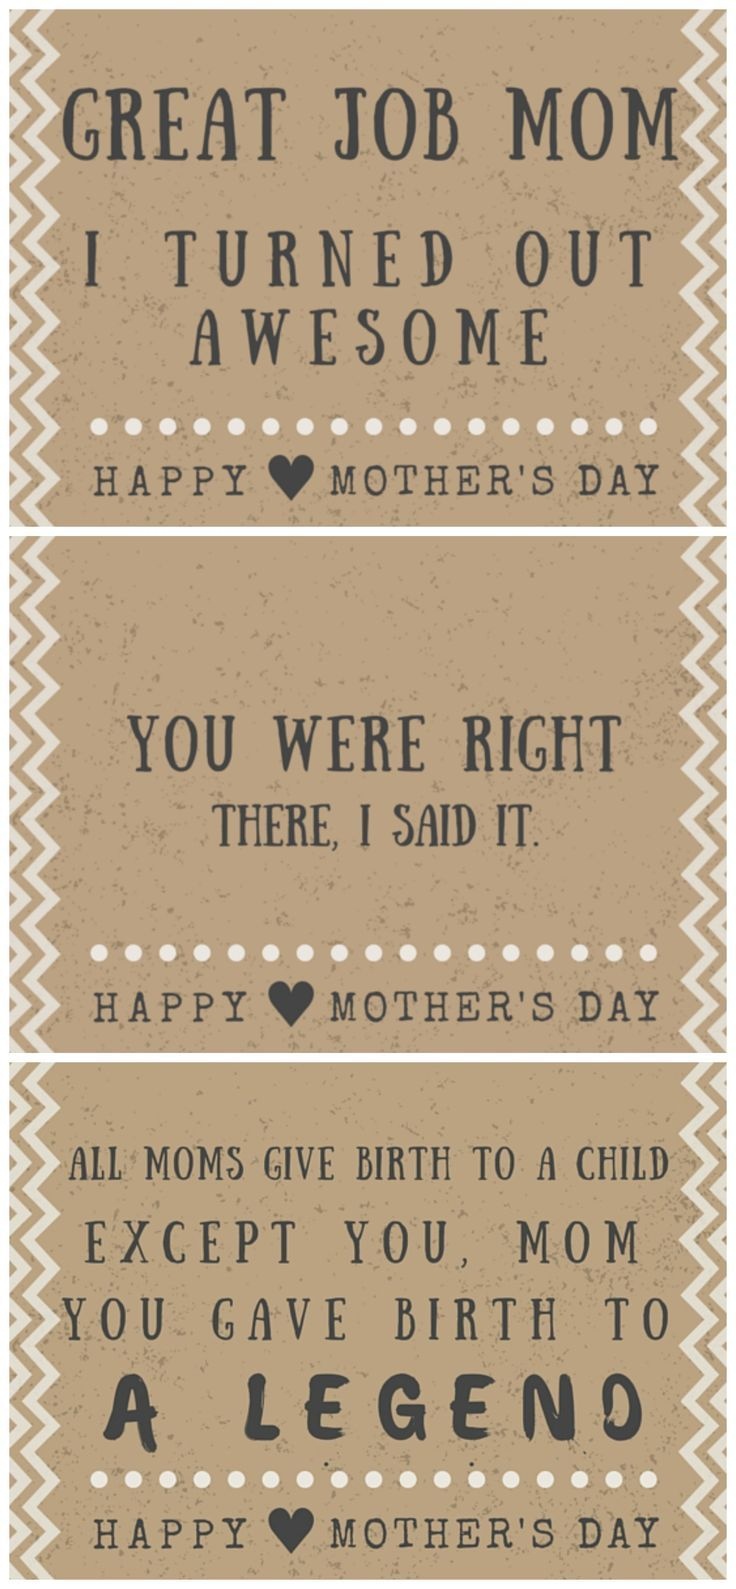 30 Funny Mother&amp;#039;s Day Cards - Free Printables With Hilarious Quotes - Free Printable Birthday Cards For Mom From Son